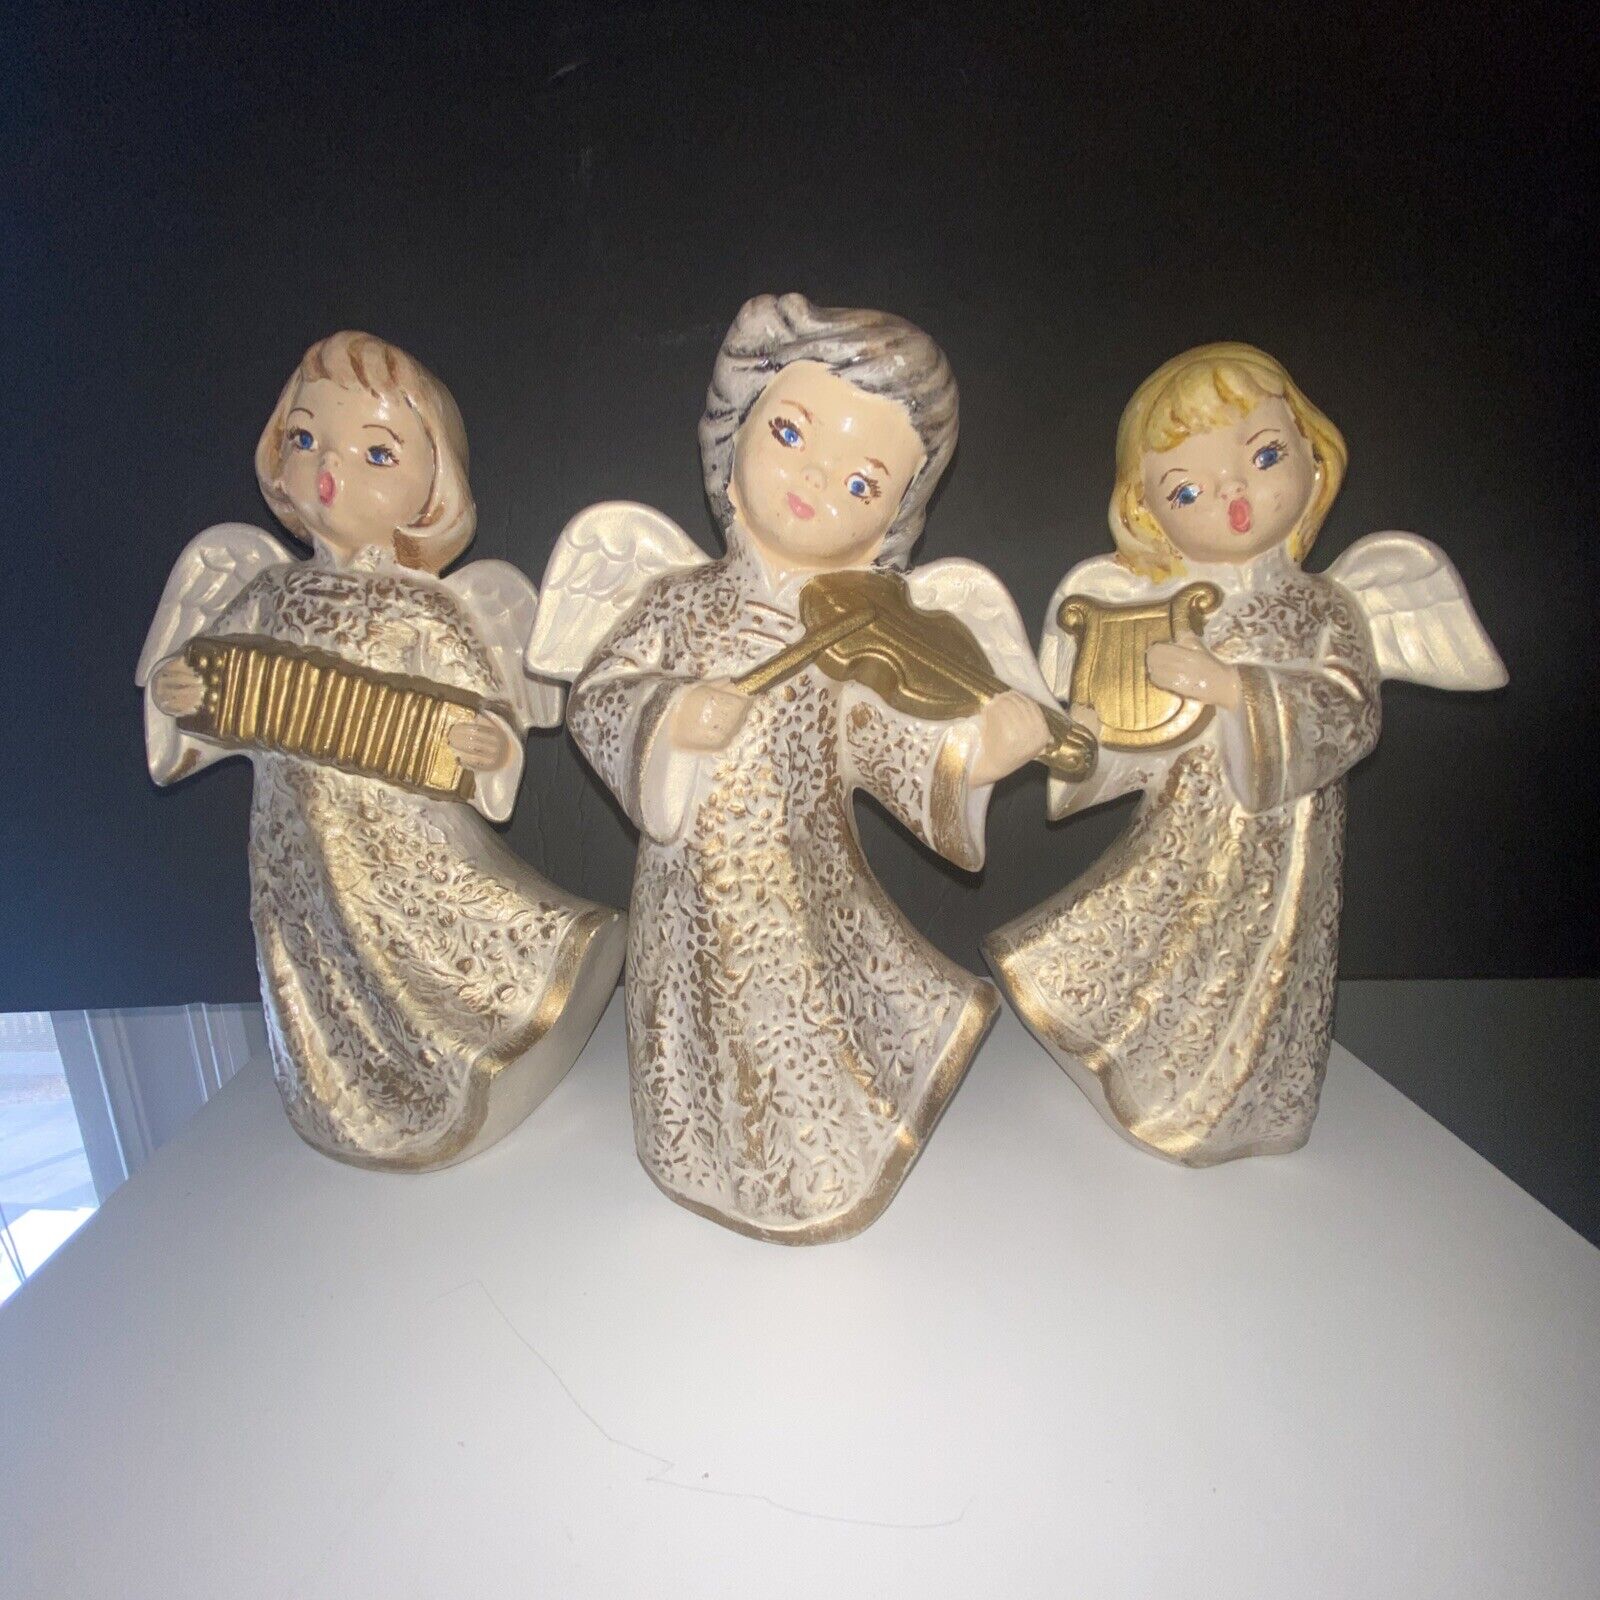 3 Vintage Ceramic Mold 8” Figurines Christmas  Angels Playing Instruments 1974